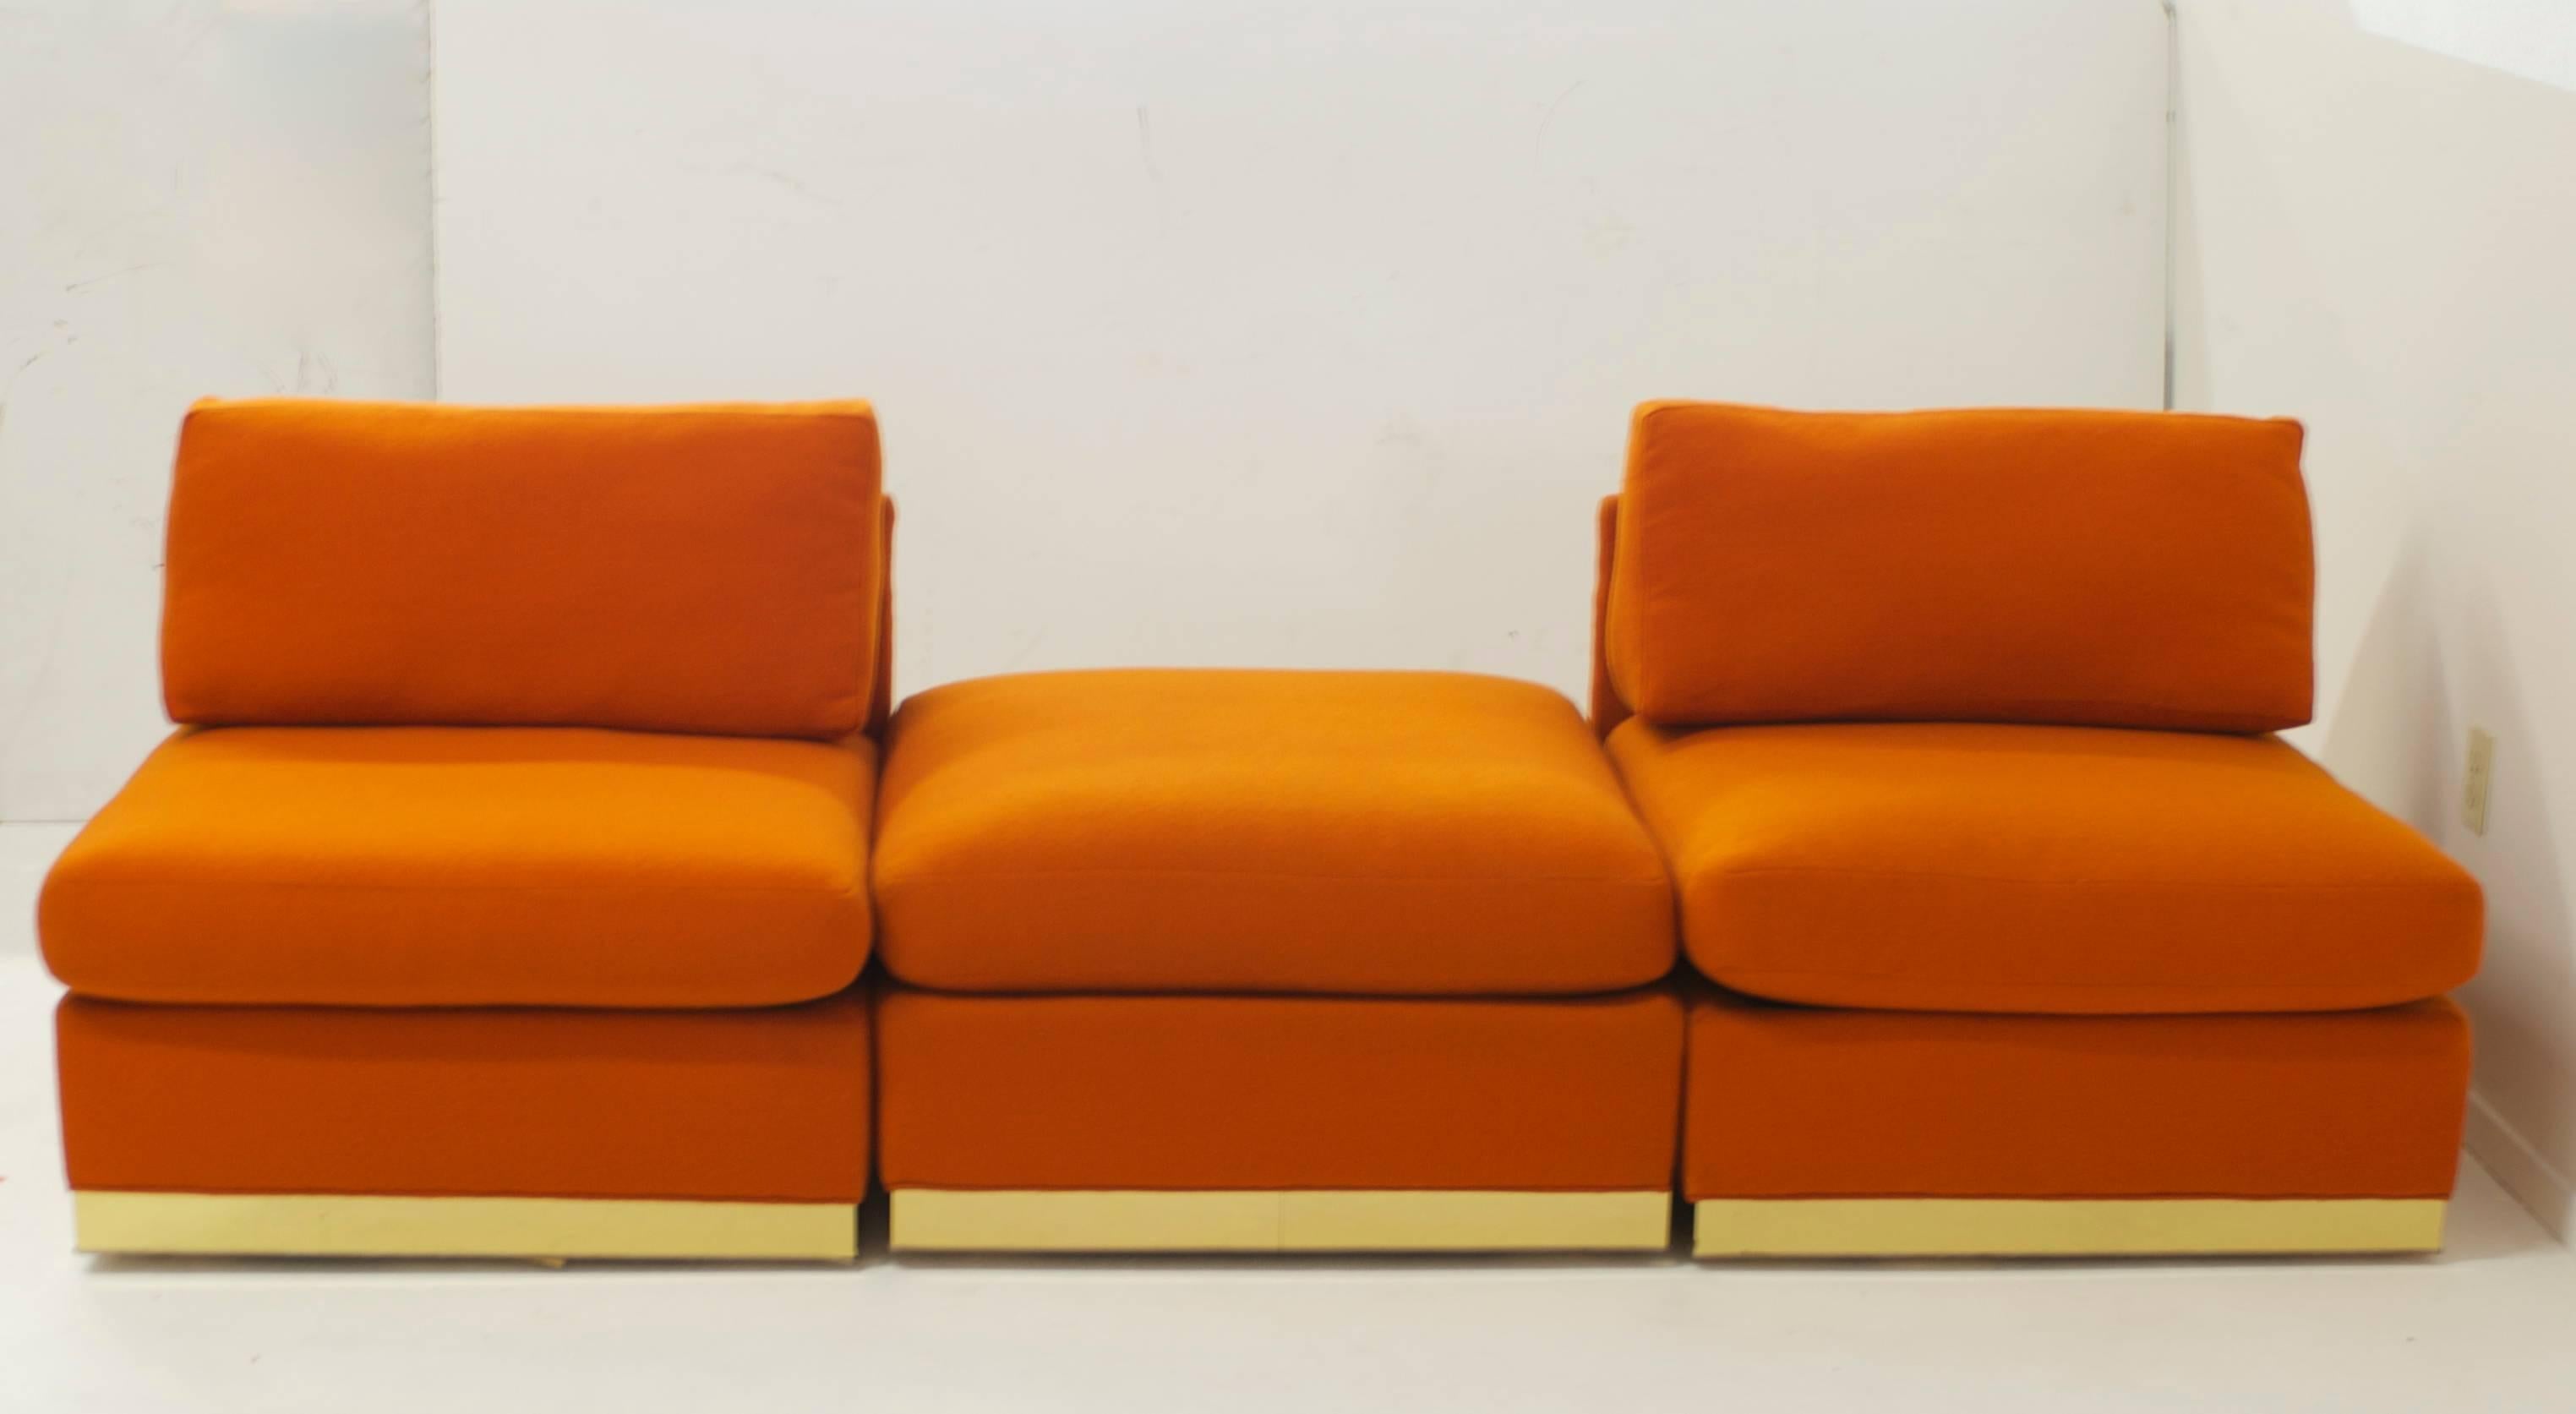 A seating group by Milo Baughman for Thayer Coggin in the original orange fabric. The set comprises of four armless slipper chairs two ottomans and two stools.
There sets of chairs are different but complementary. The set with the brass base have